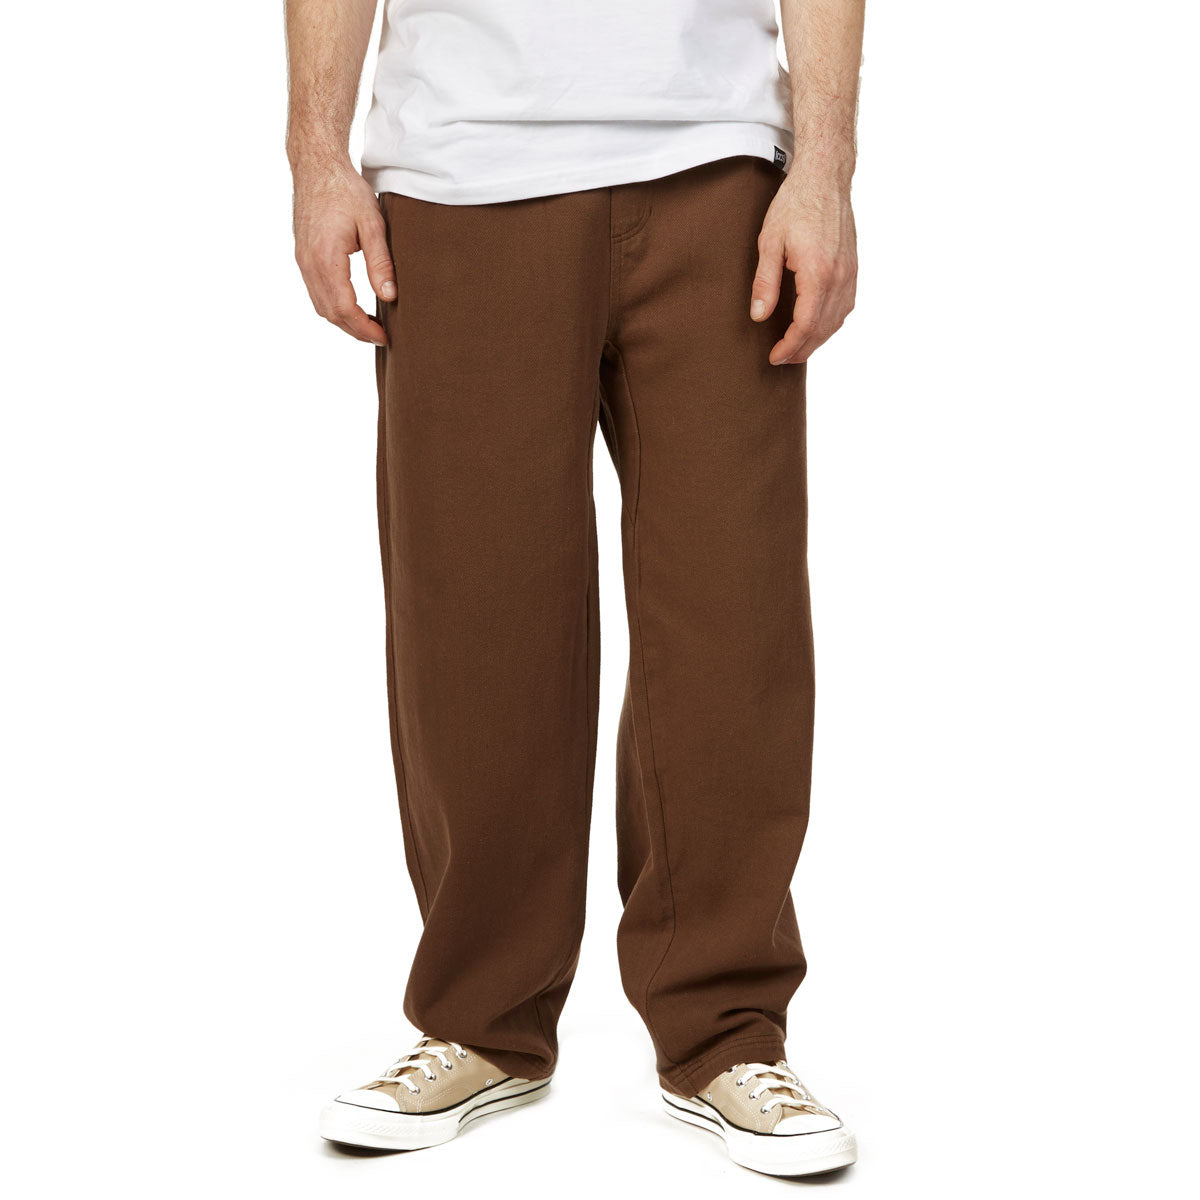 CCS Easy Twill Pants - New Brown image 1